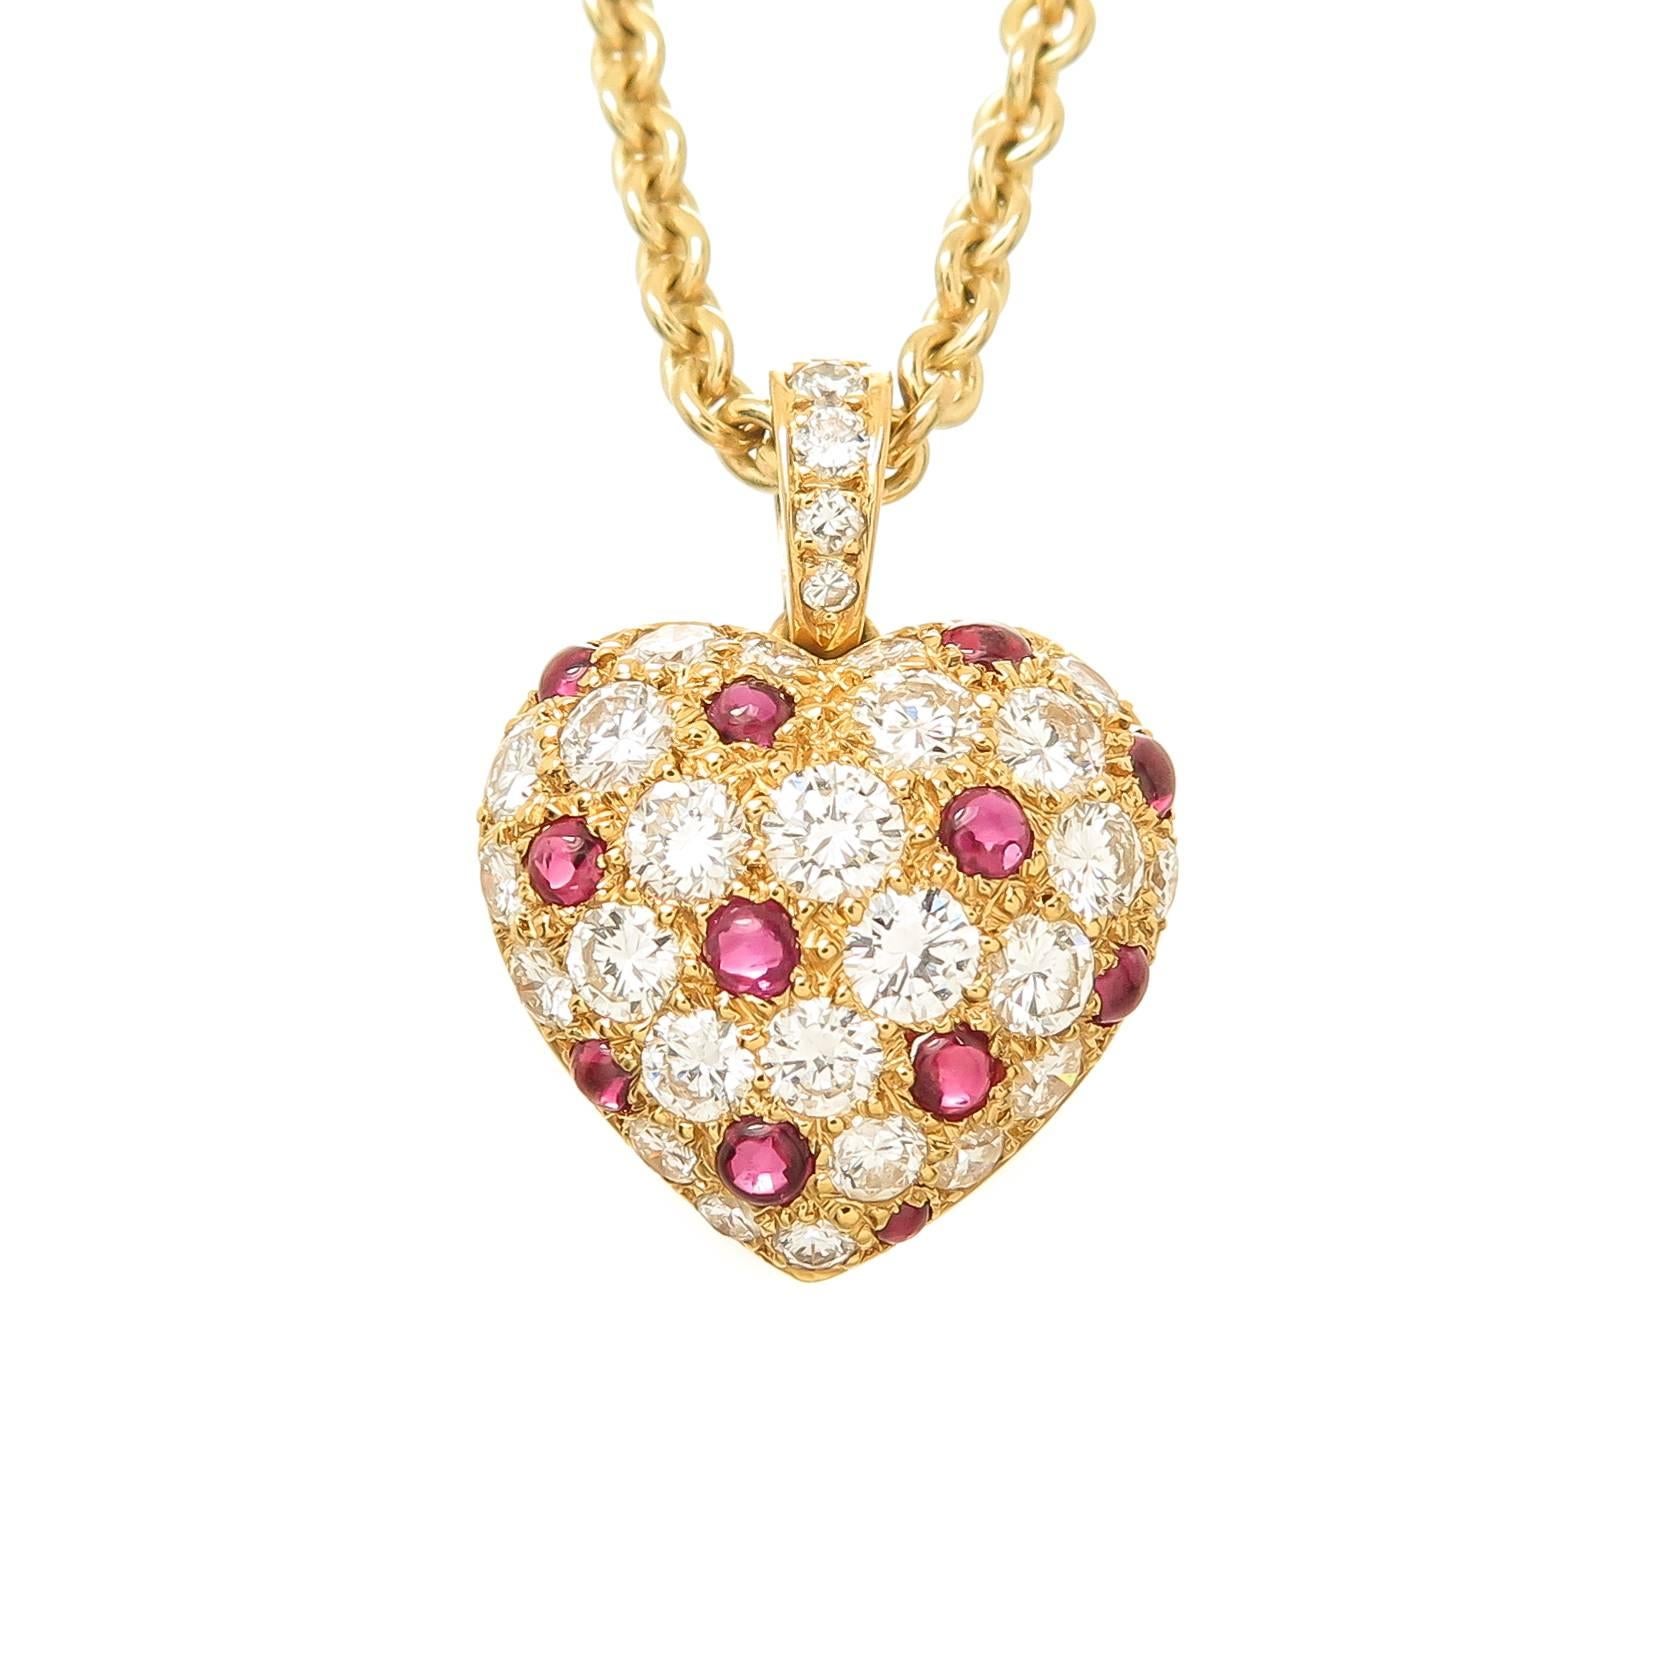 Cartier Diamond and Ruby Heart Pendant Necklace